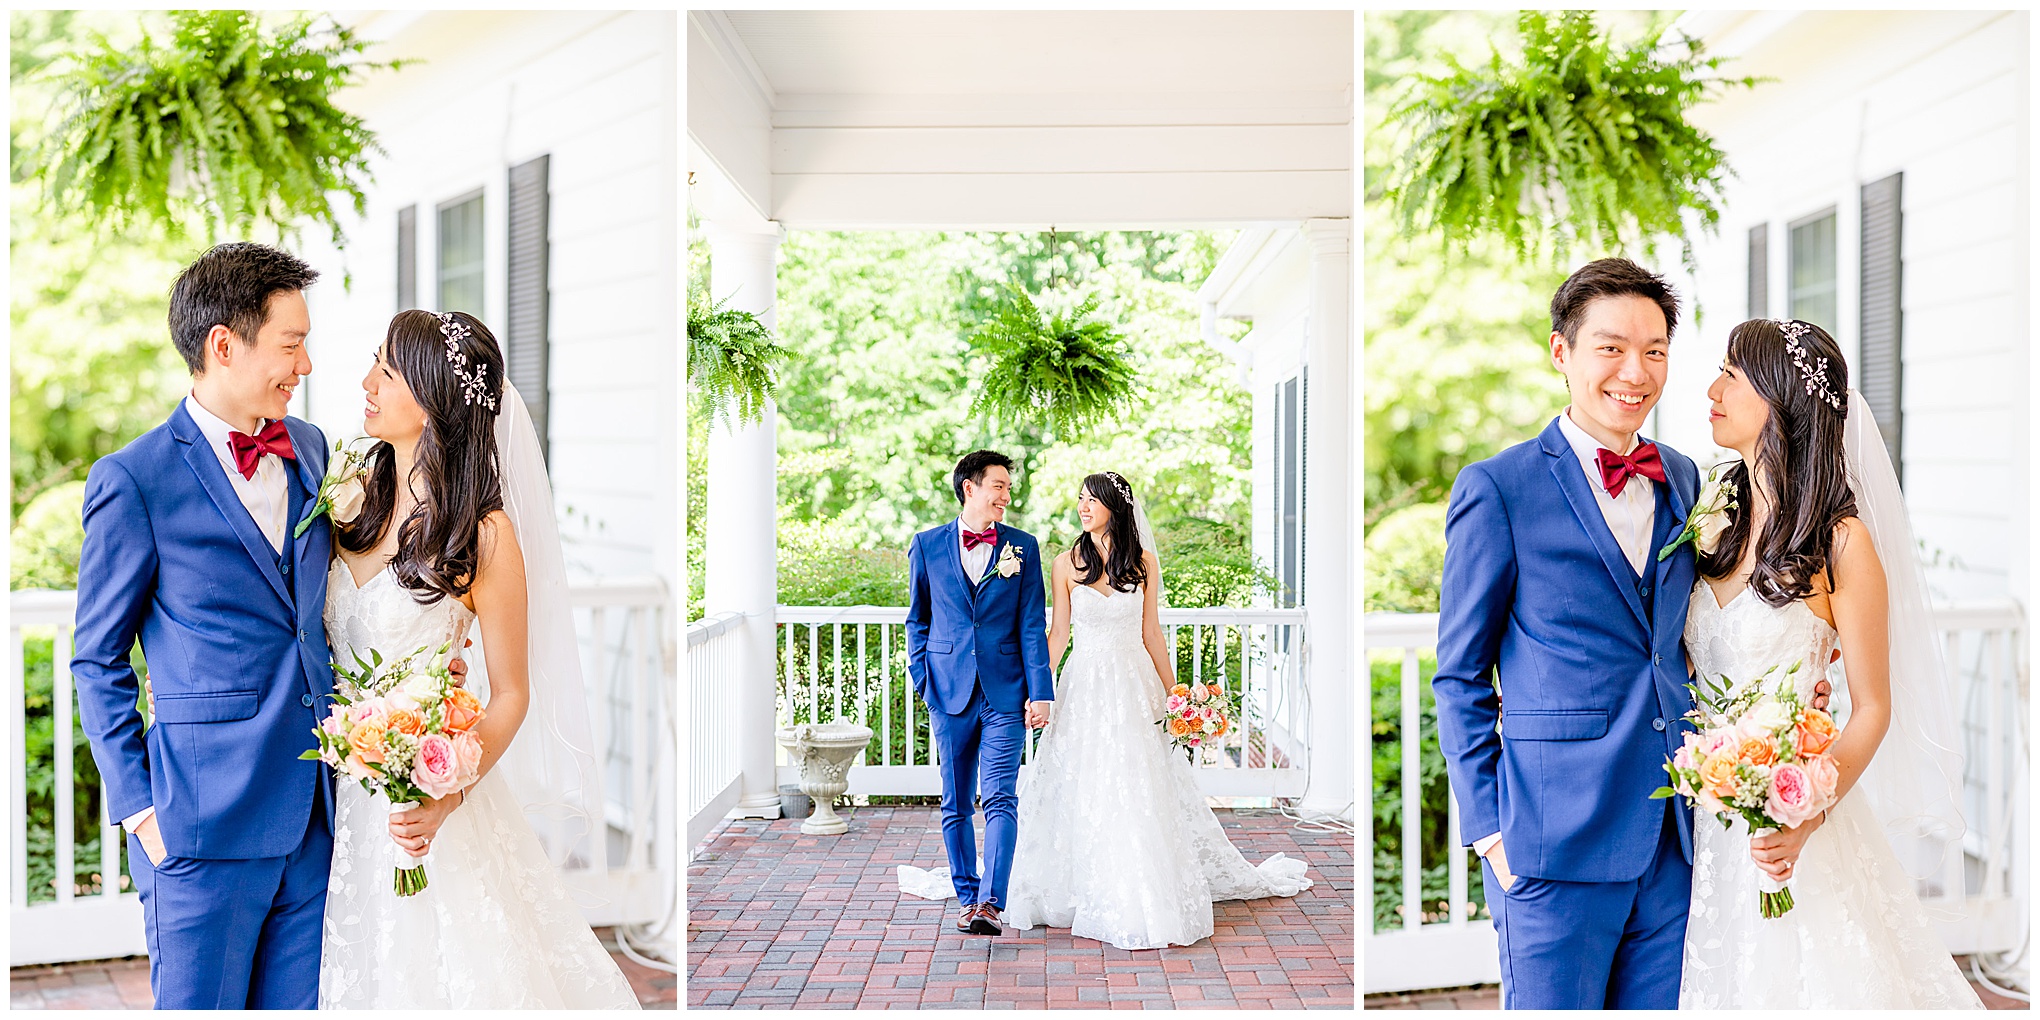 spring Westfields Golf Club wedding, Clifton Virginia wedding, northern Virginia wedding venue, DC wedding photographer, DC photographer, Virginia country club wedding, spring wedding aesthetic, Chinese American wedding, Rachel E.H.Photography, bride and groom smiling at each other, bride and groom walking down porch 